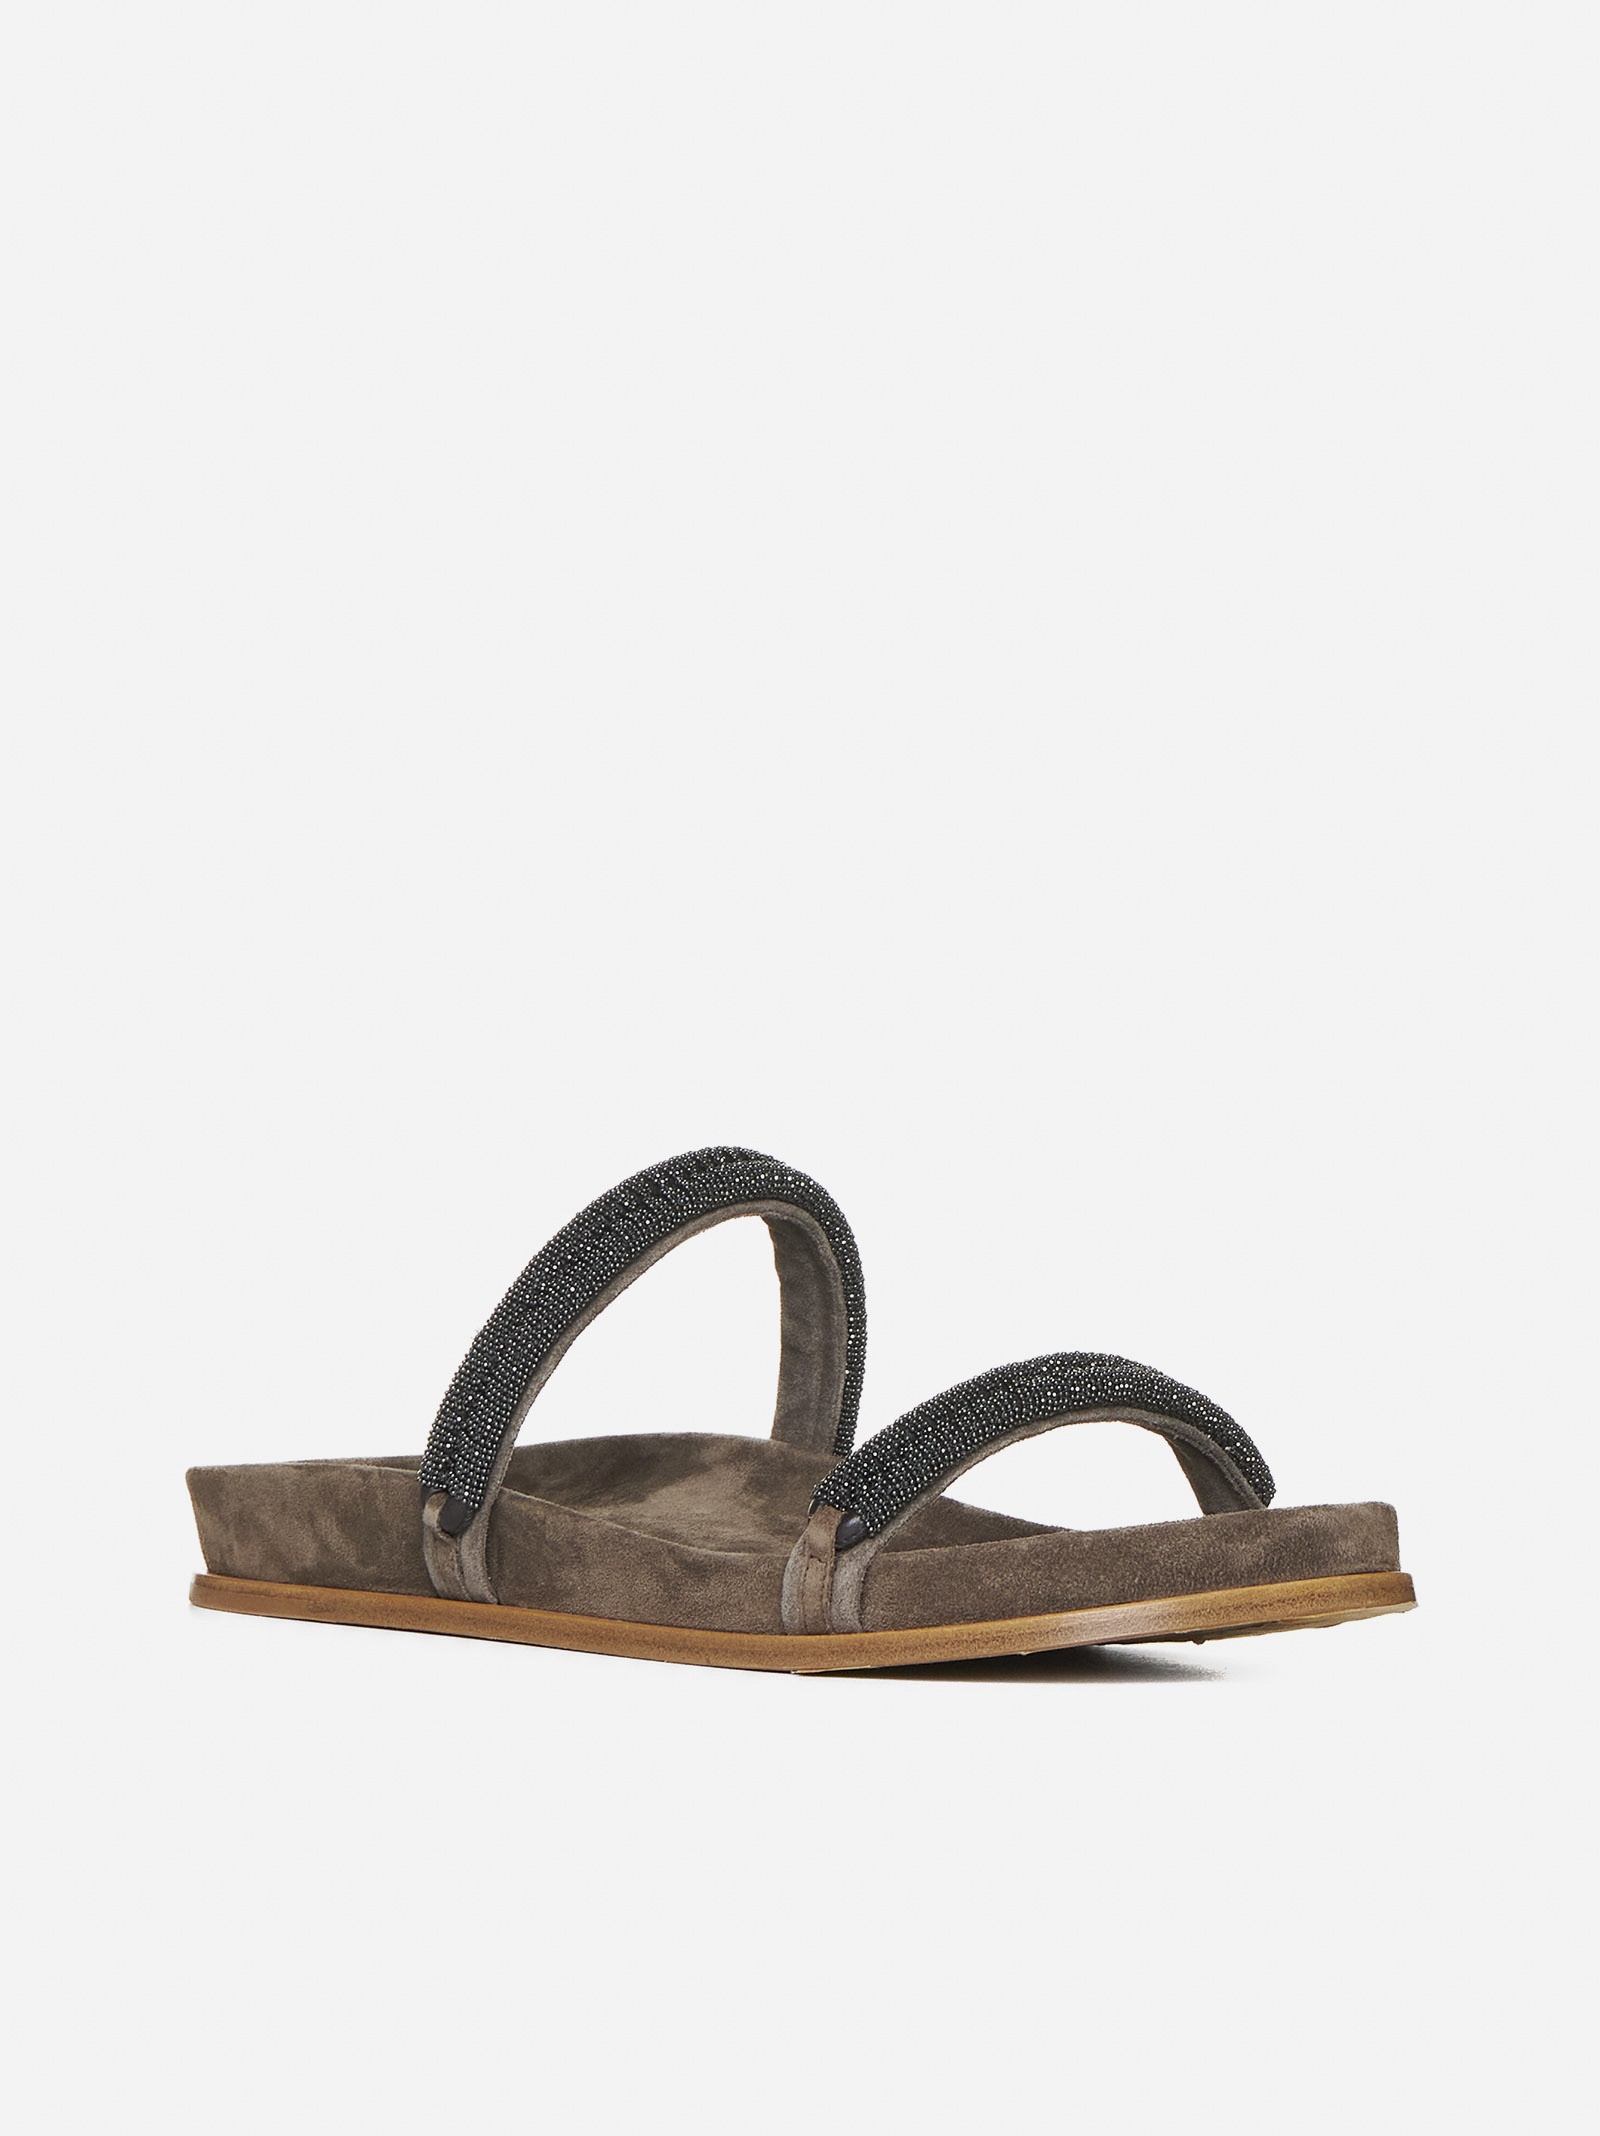 Monile and suede sandals - 2